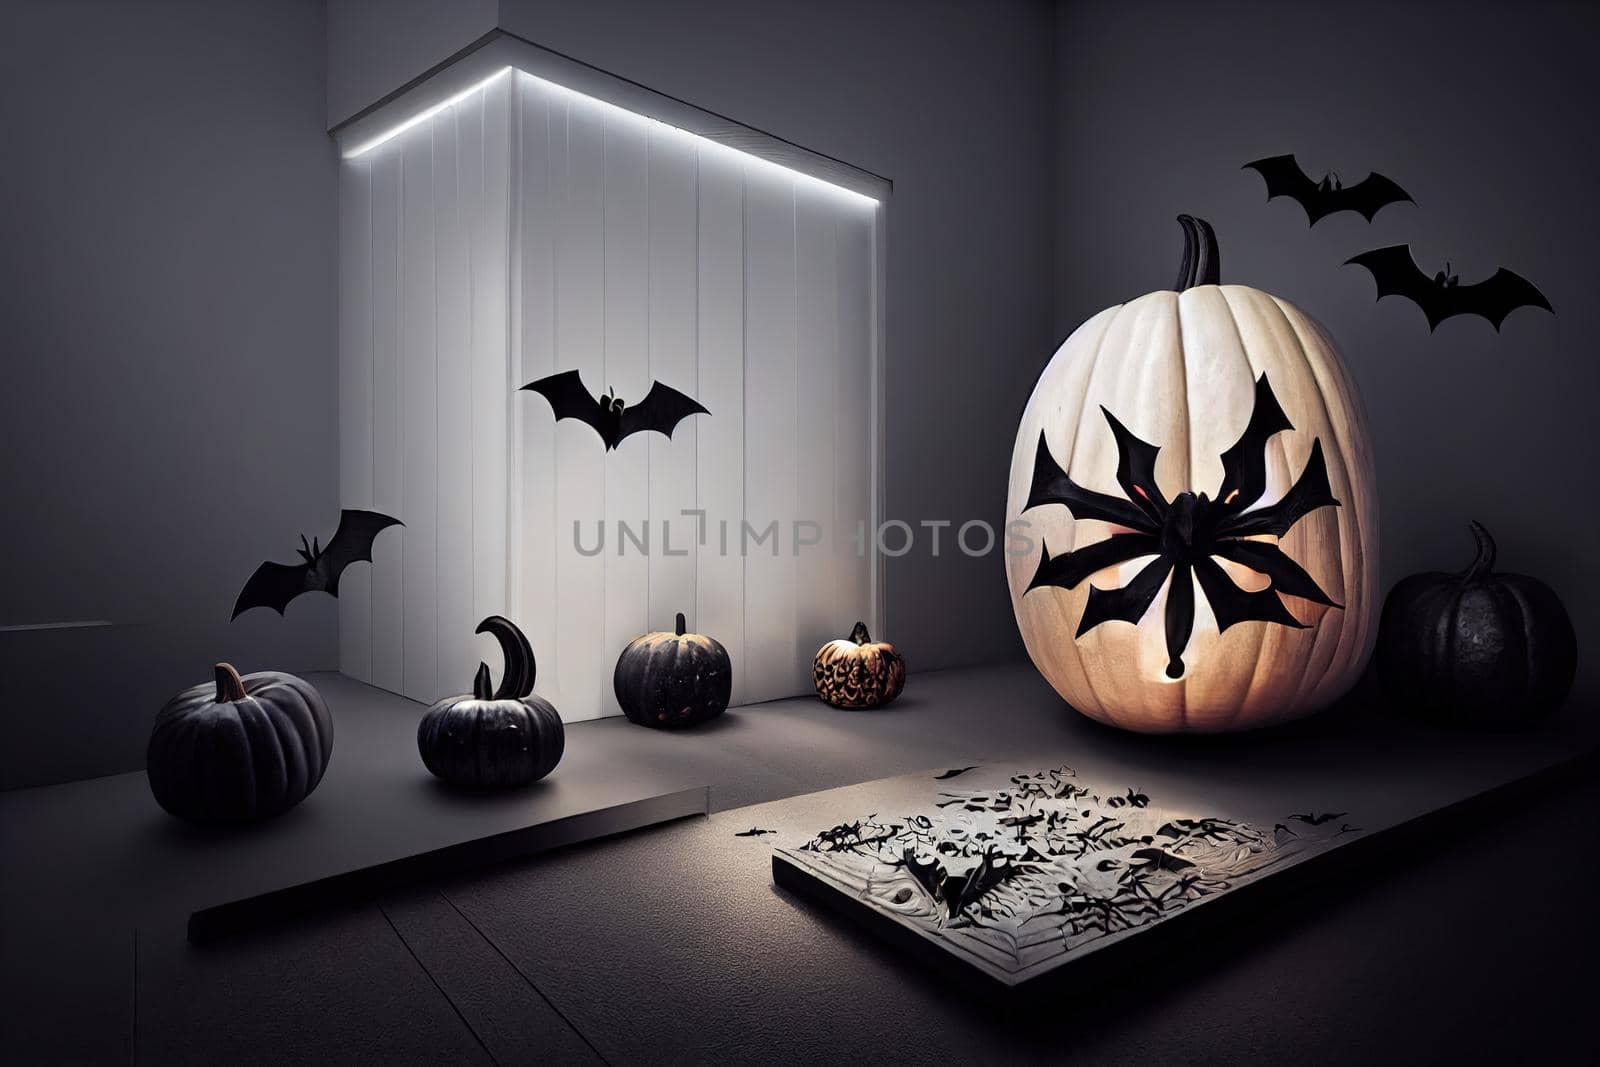 Carved pumpkins, bats and spiders by 2ragon